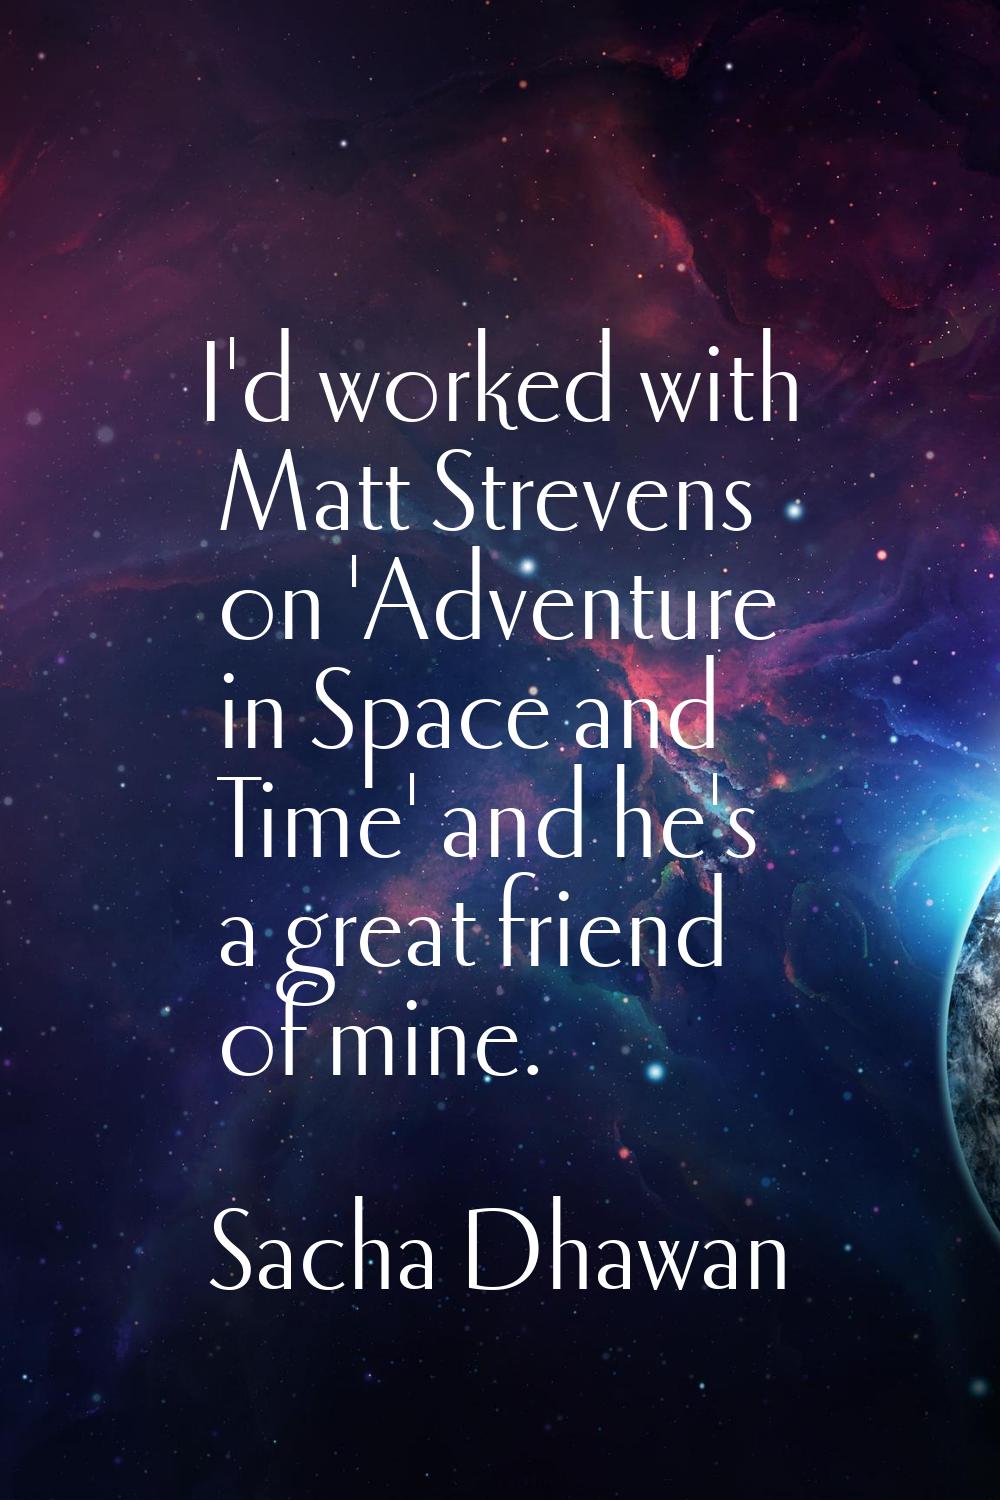 I'd worked with Matt Strevens on 'Adventure in Space and Time' and he's a great friend of mine.